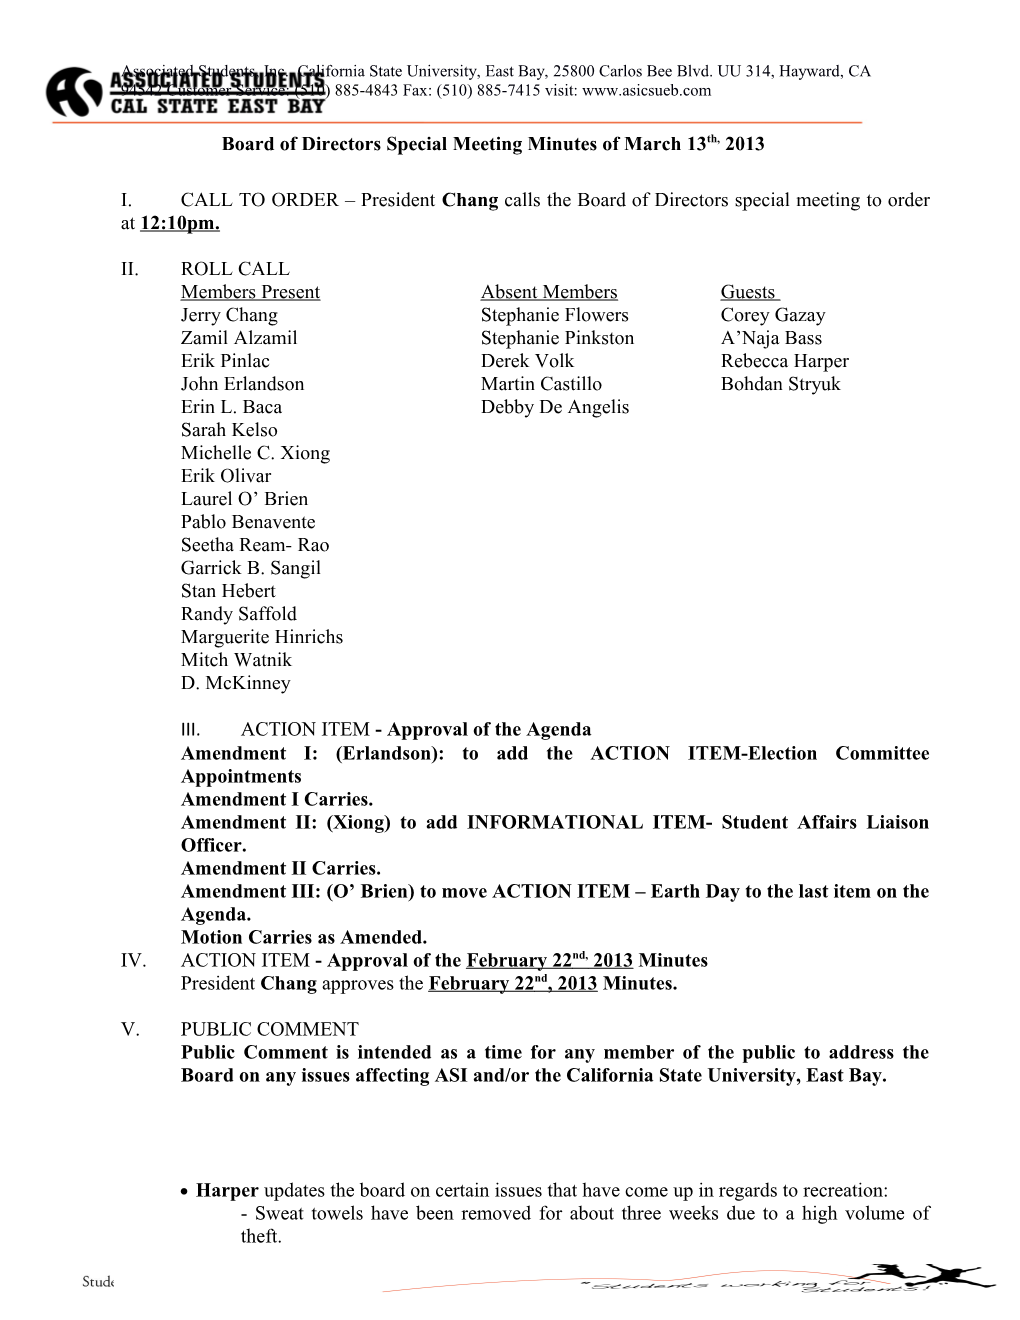 I.CALL to ORDER President Chang Calls the Board of Directors Special Meeting to Order At